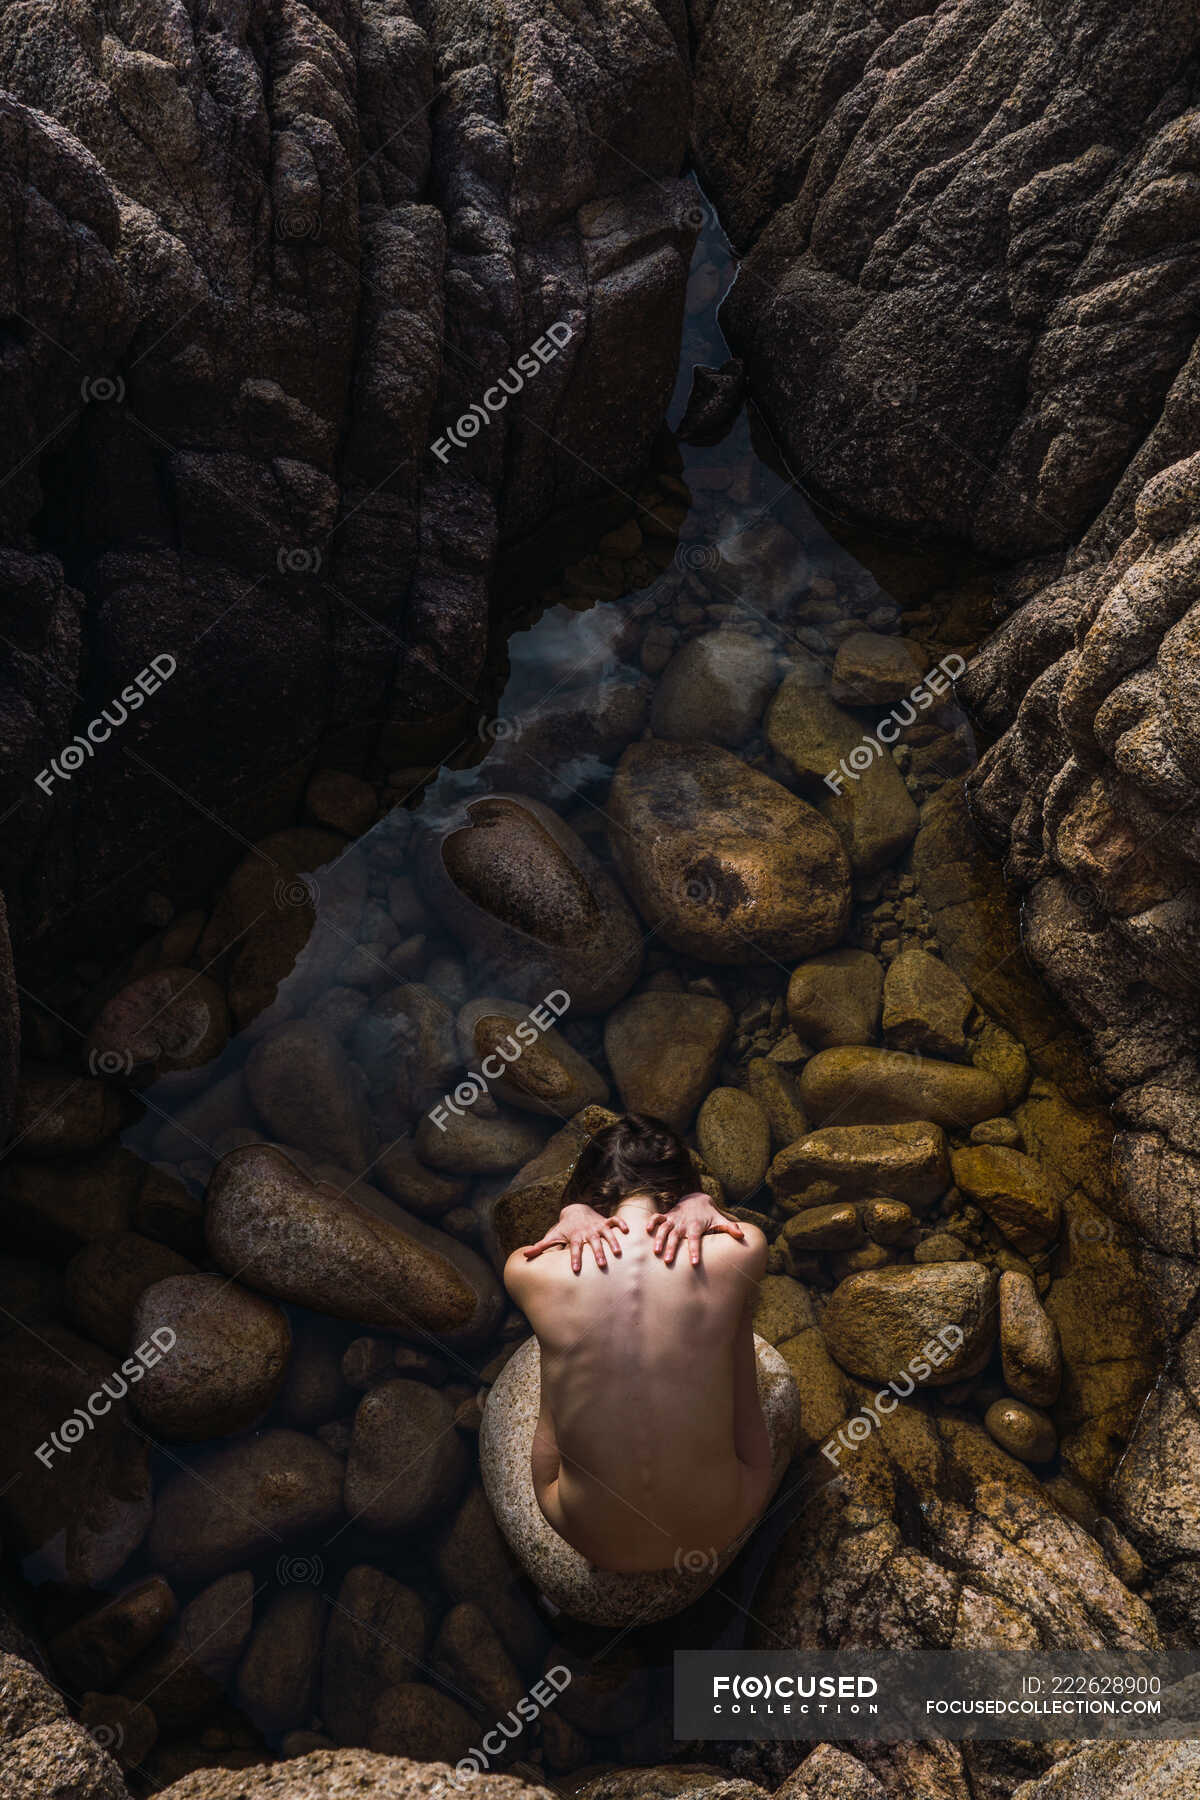 Best Nudist Girl Gallery - Top view of nude woman sitting on stones and touching back in the water in  nature. â€” model, charming - Stock Photo | #222628900